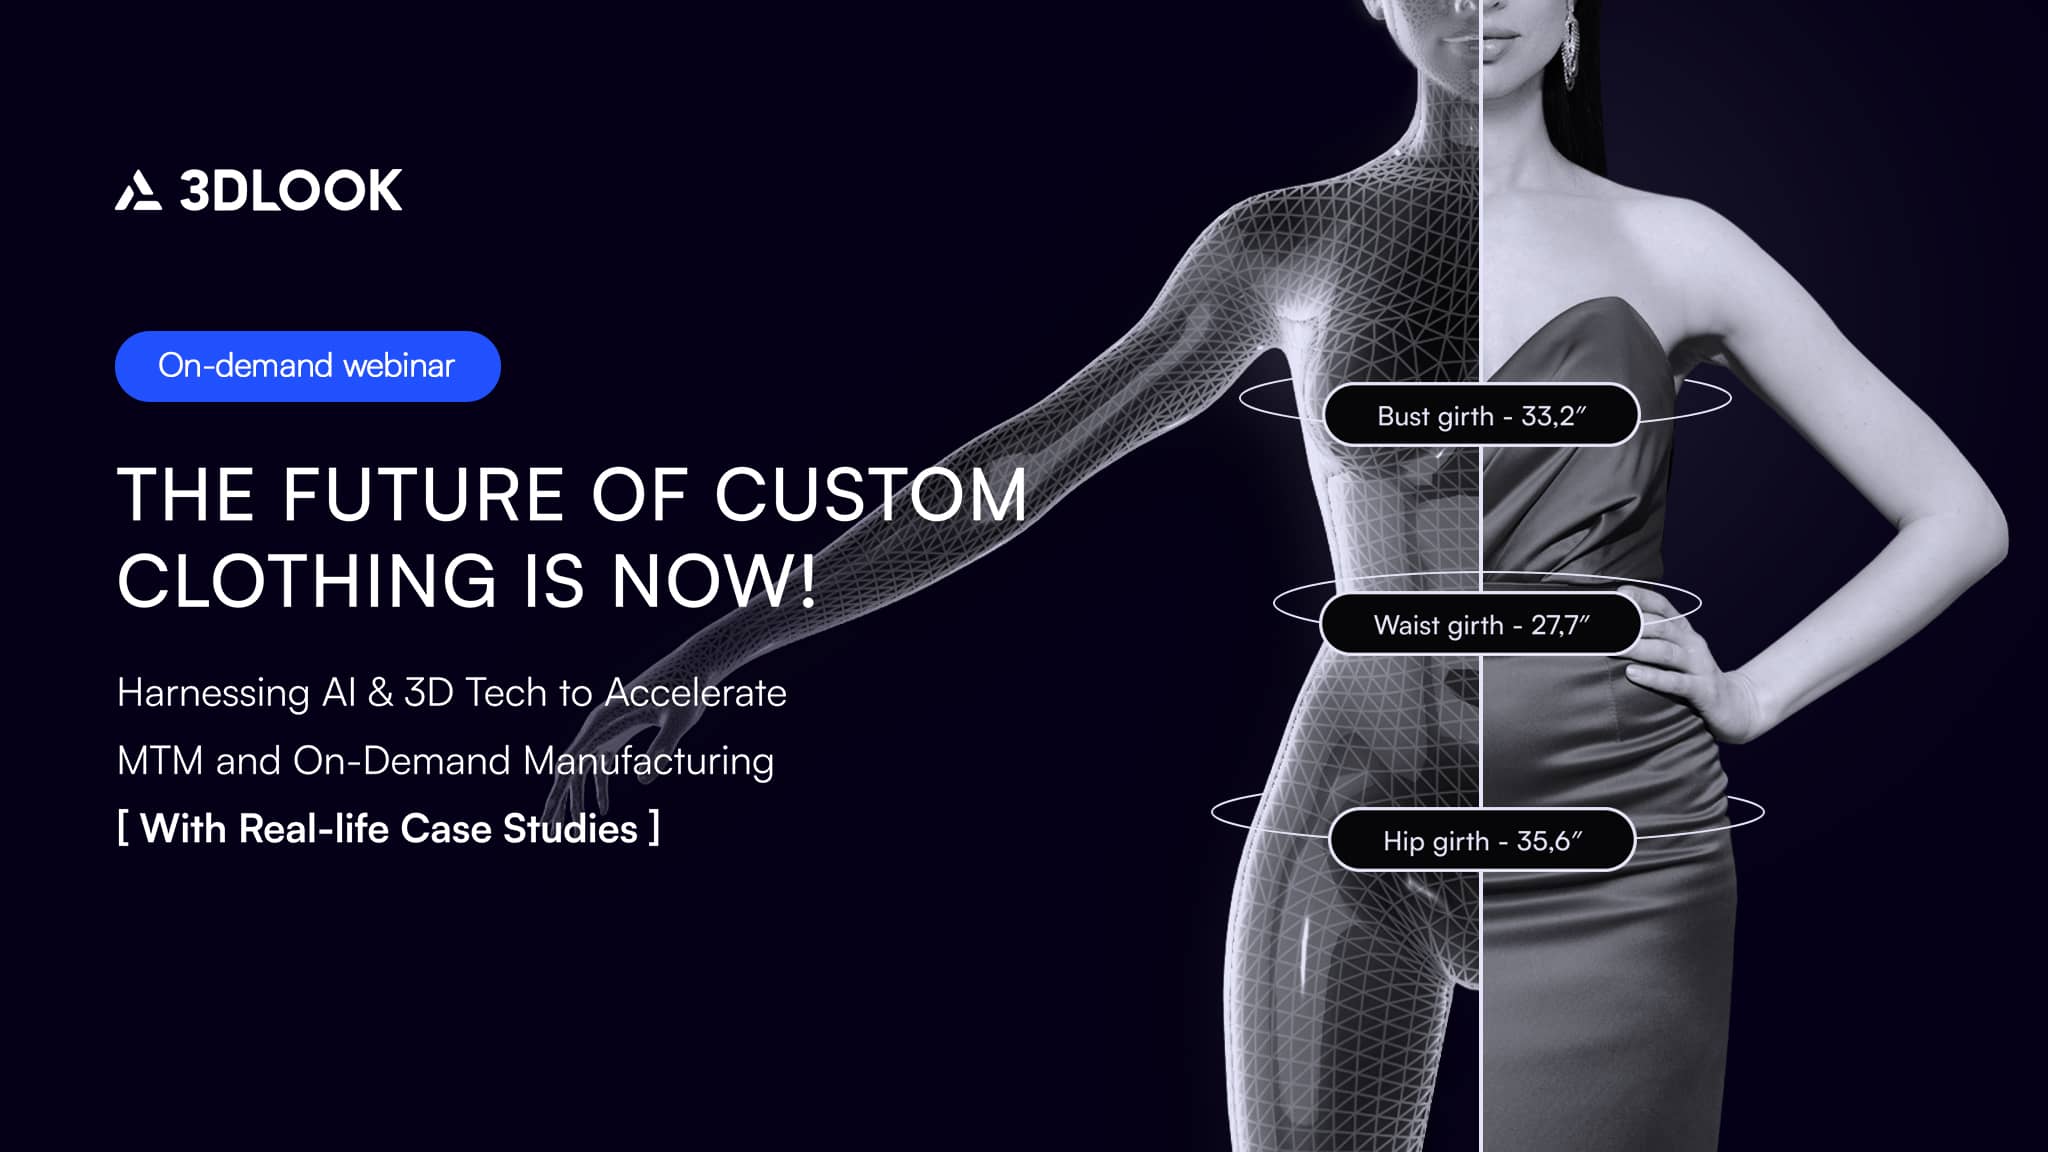 The future of custom clothing is advancing with On-Demand Manufacturing and AI technology.